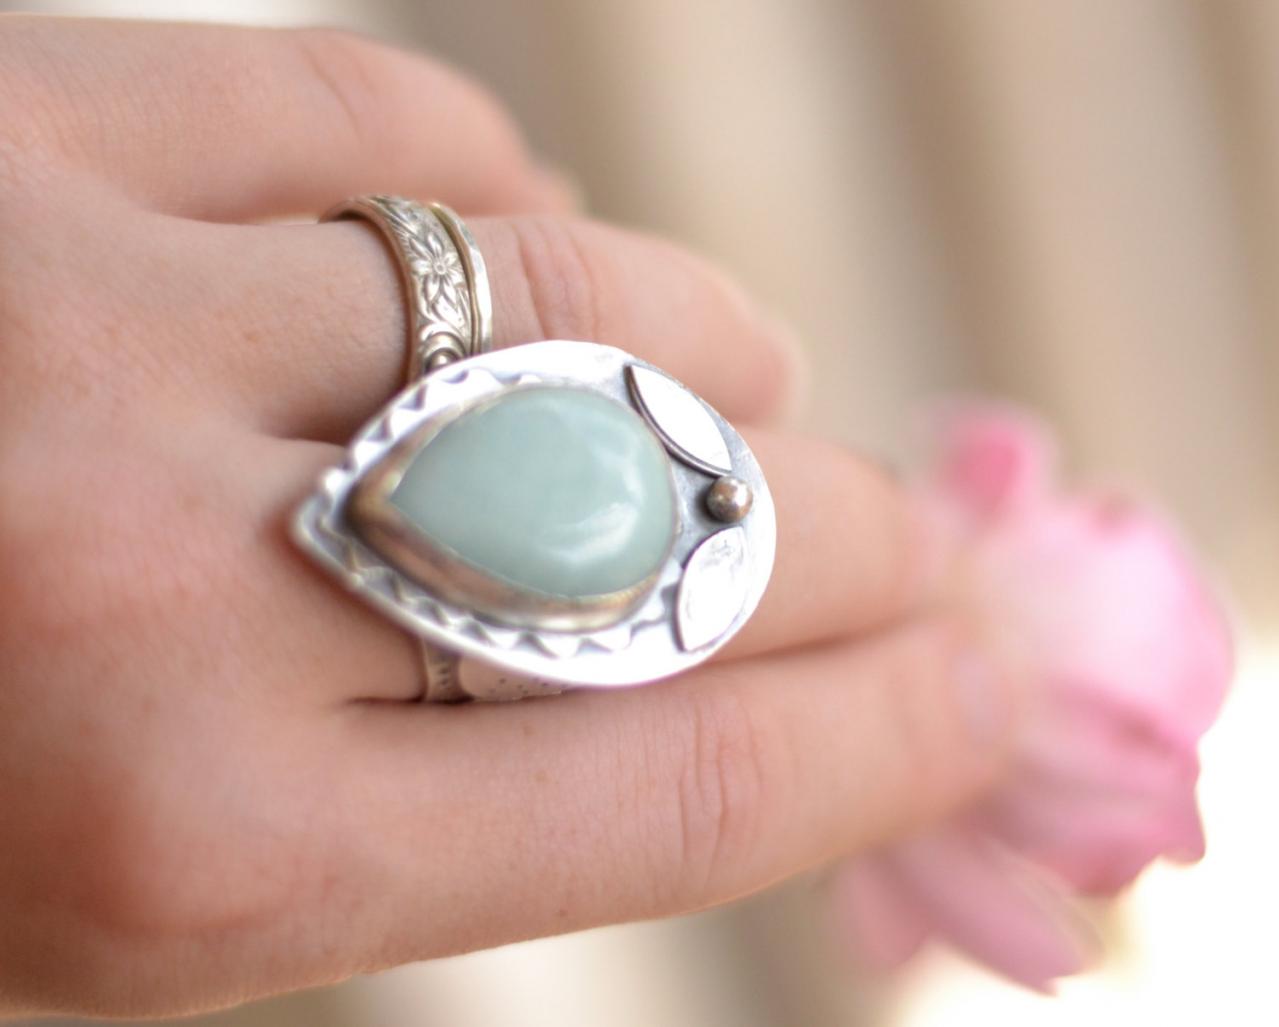 Handmade Sterling Silver Metalwork Ring With A Tear Drop Amazonite Cabochon Detailed Embellished Band All Hand Cut And Forged Sz 8